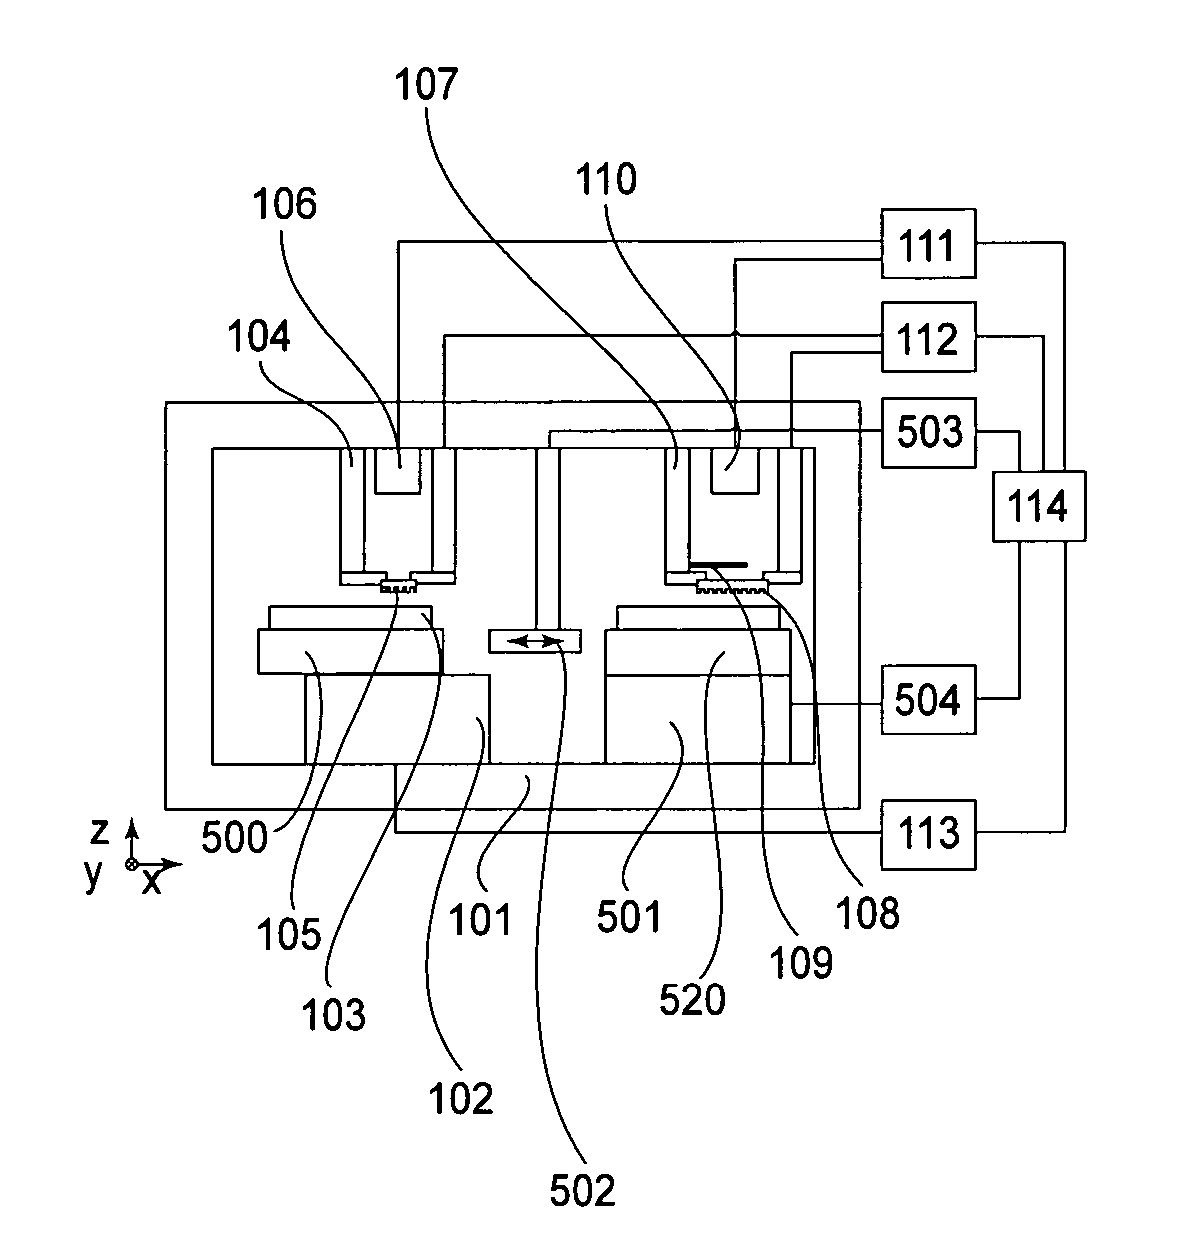 Process for producing member having pattern, pattern transfer apparatus, and mold